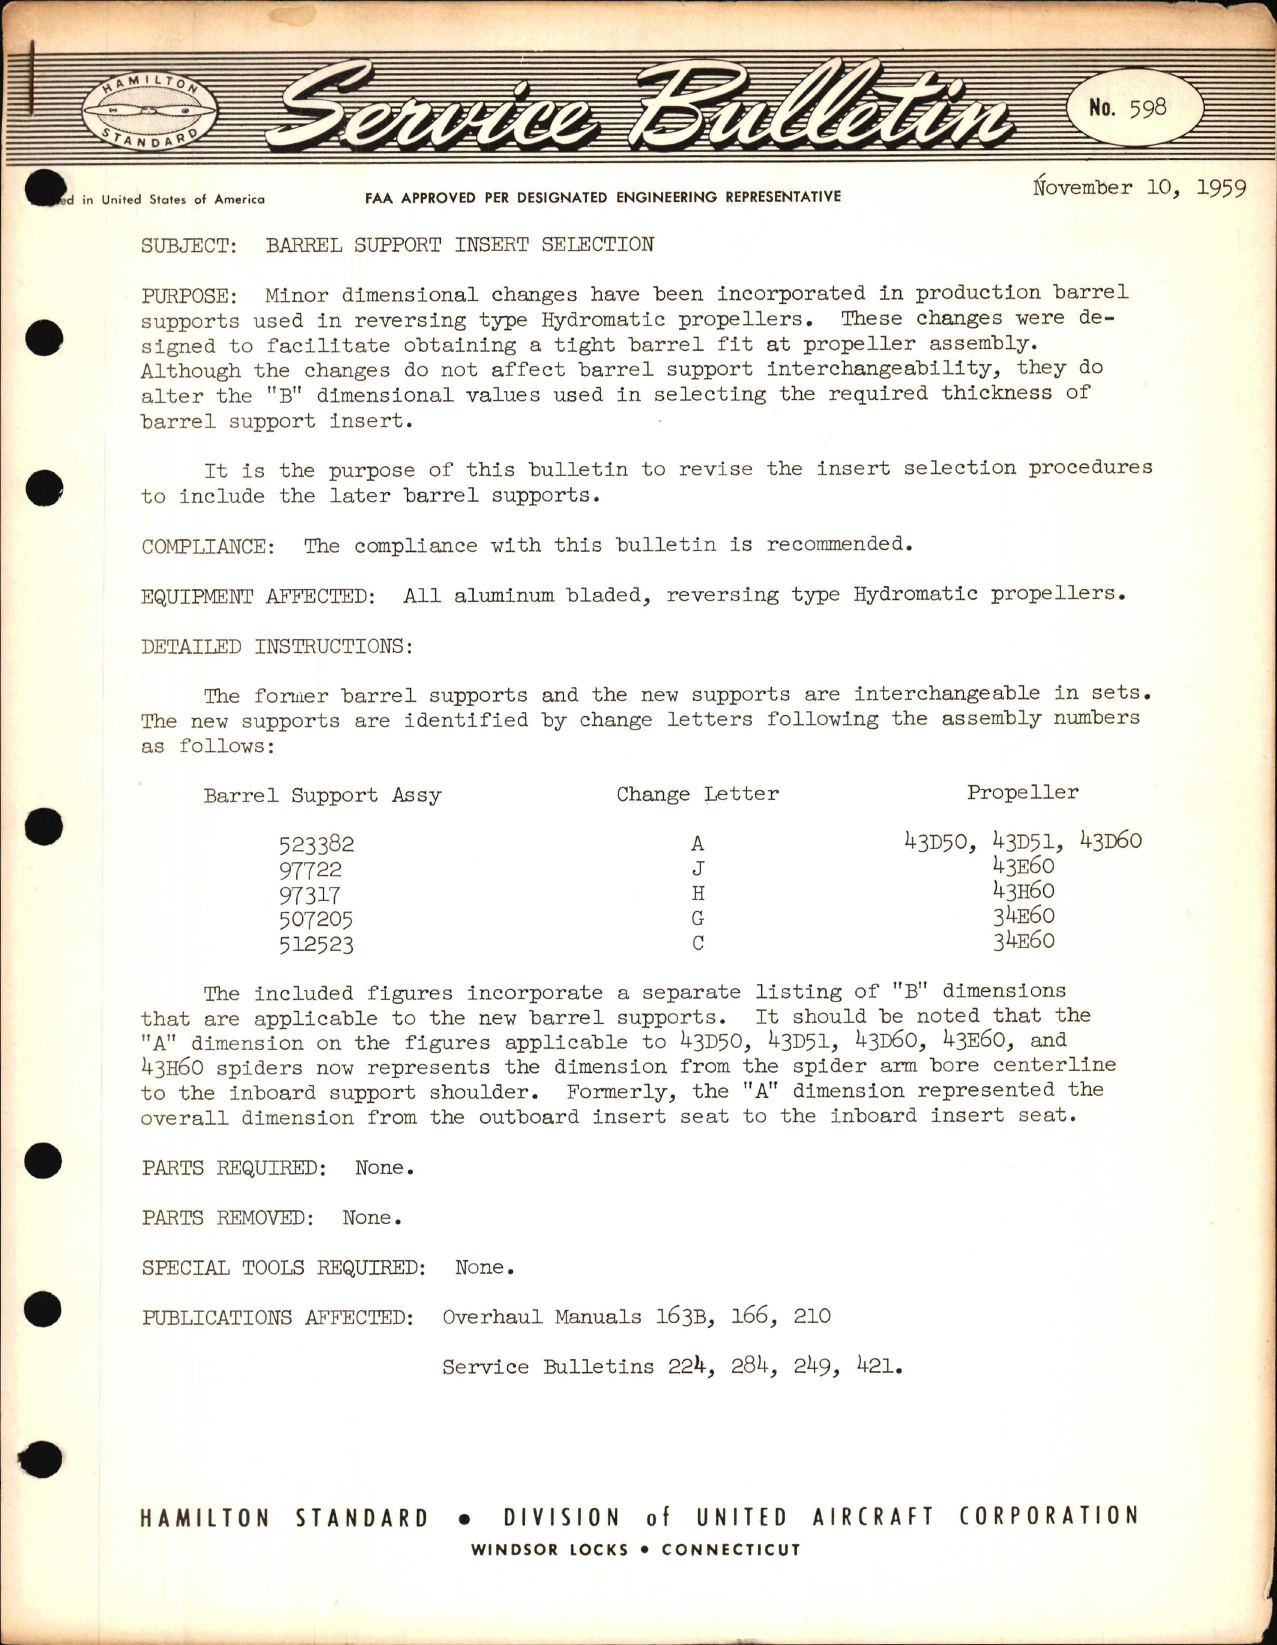 Sample page 1 from AirCorps Library document: Barrel Support Insert Selection